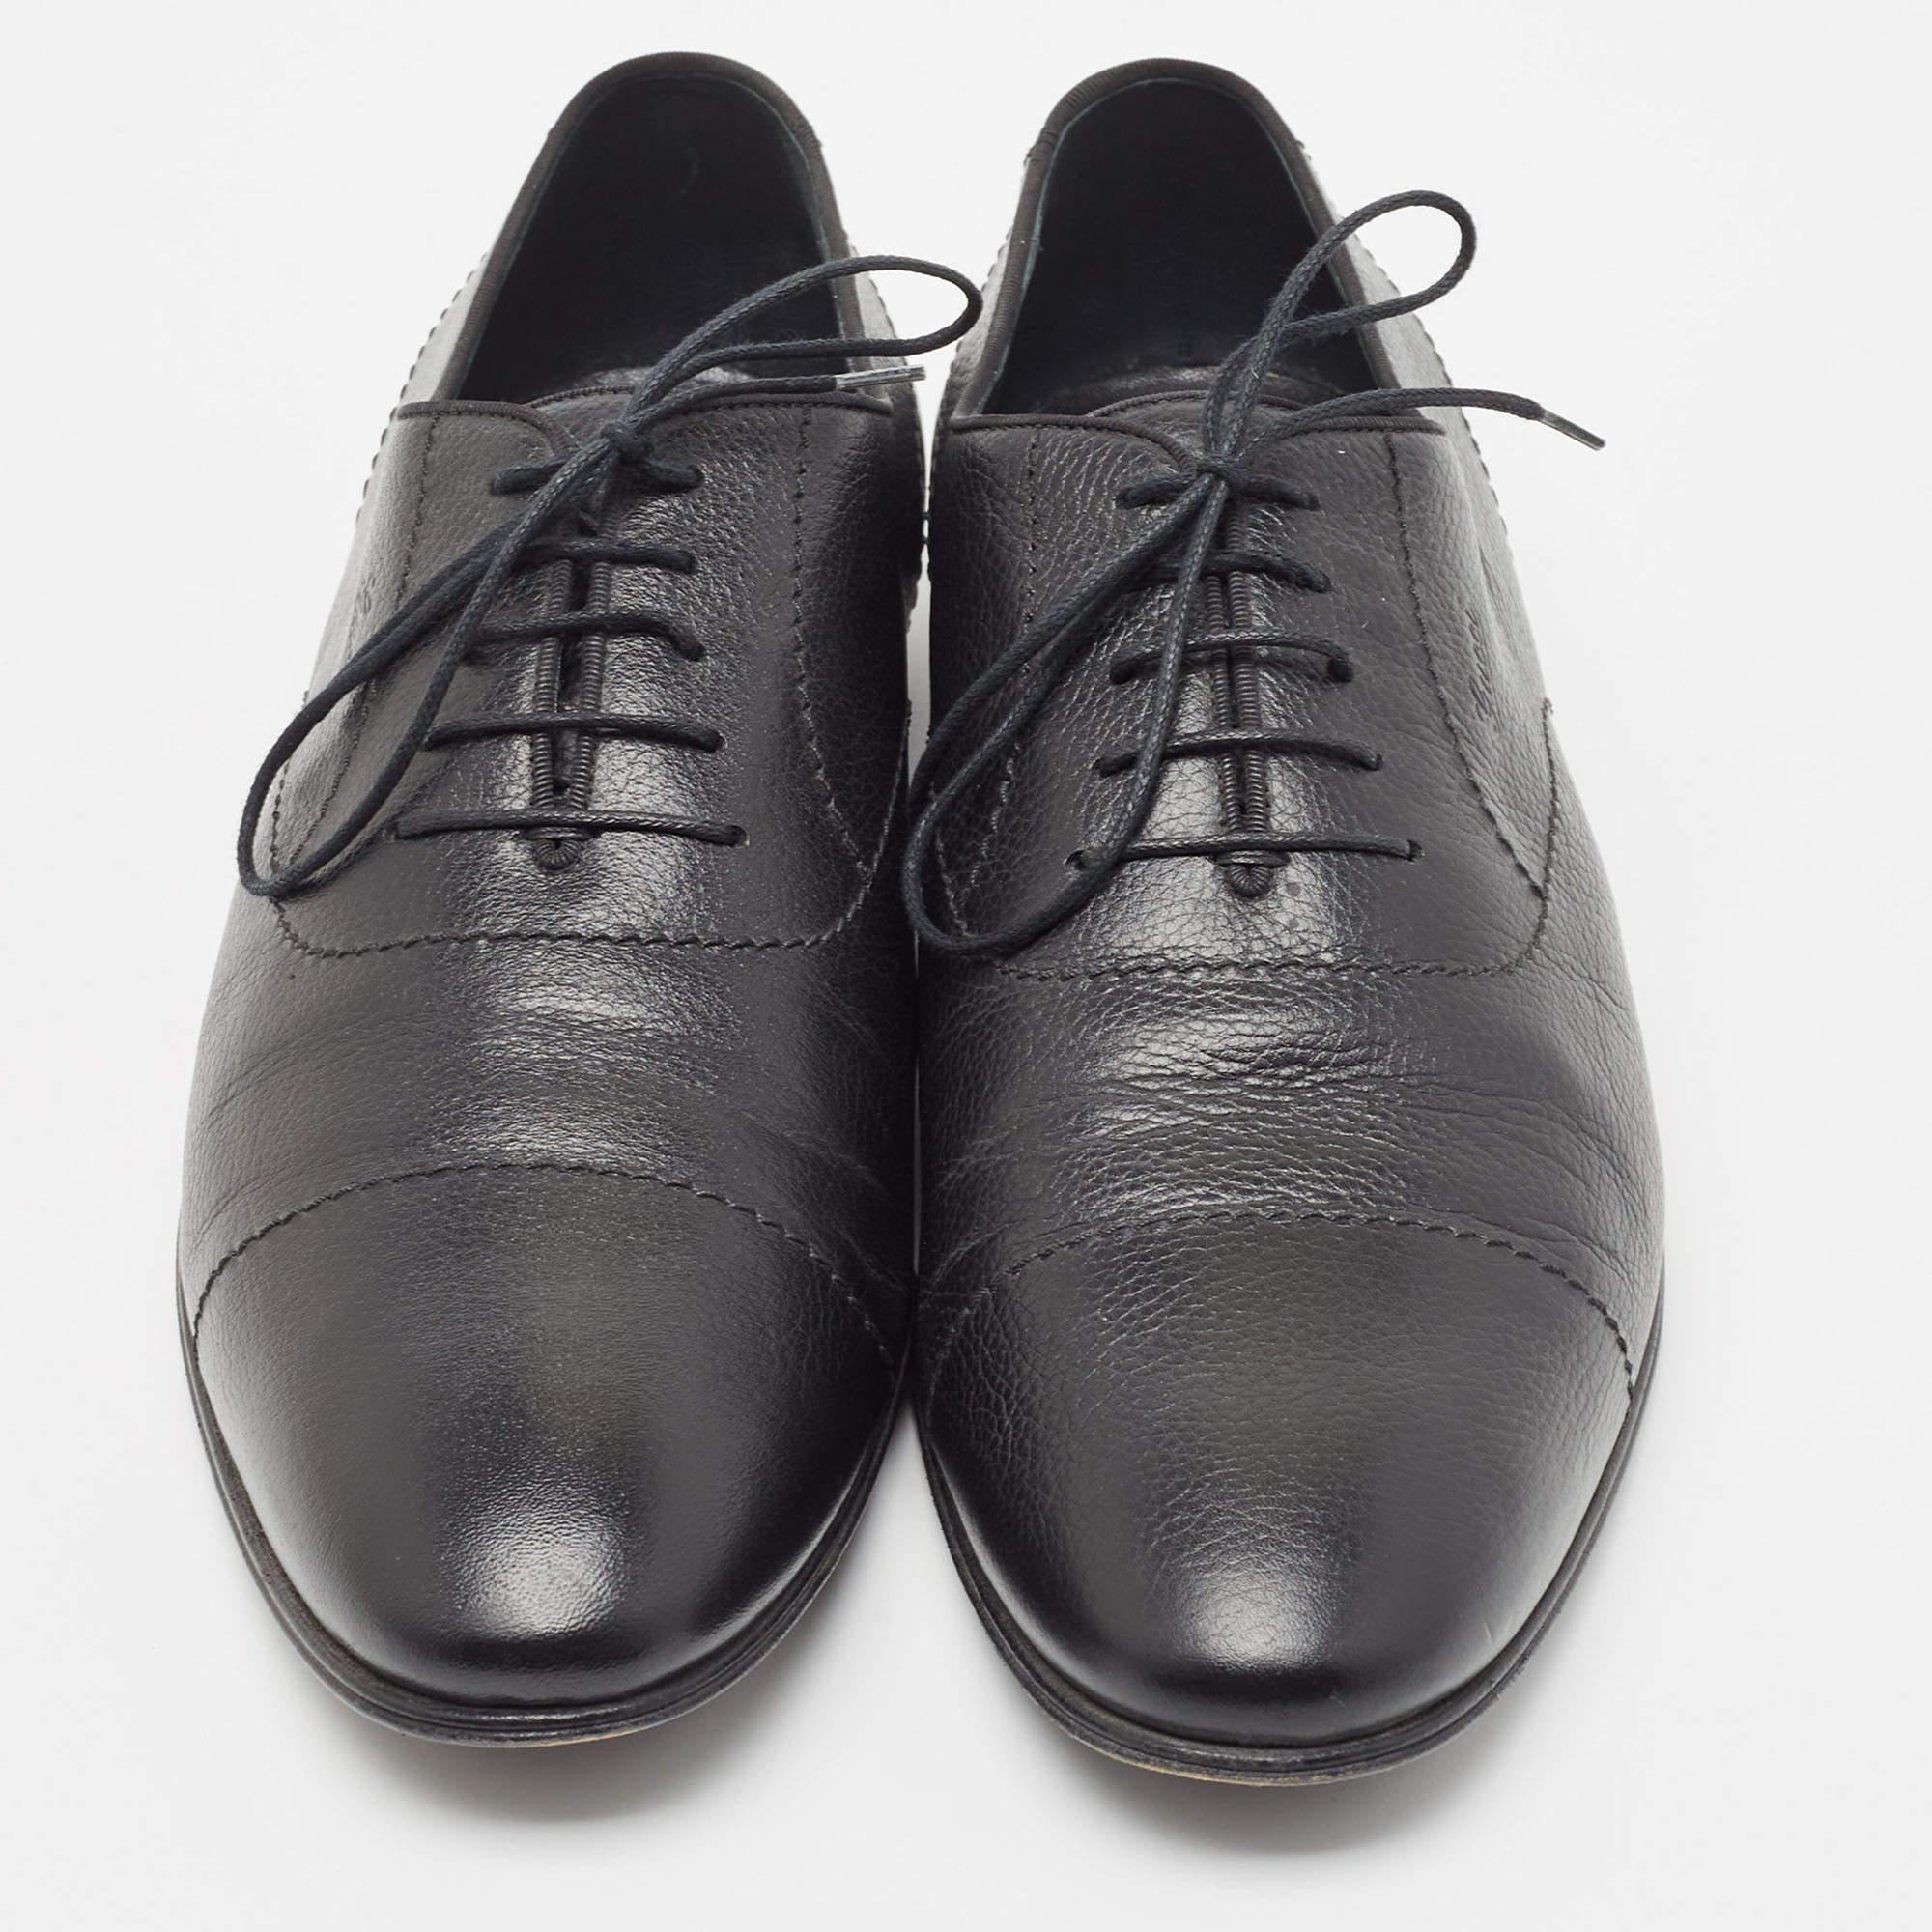 Coming in a classic silhouette, these Gucci oxfords are a seamless combination of luxury, comfort, and style. The shoes are presented in timeless black.

